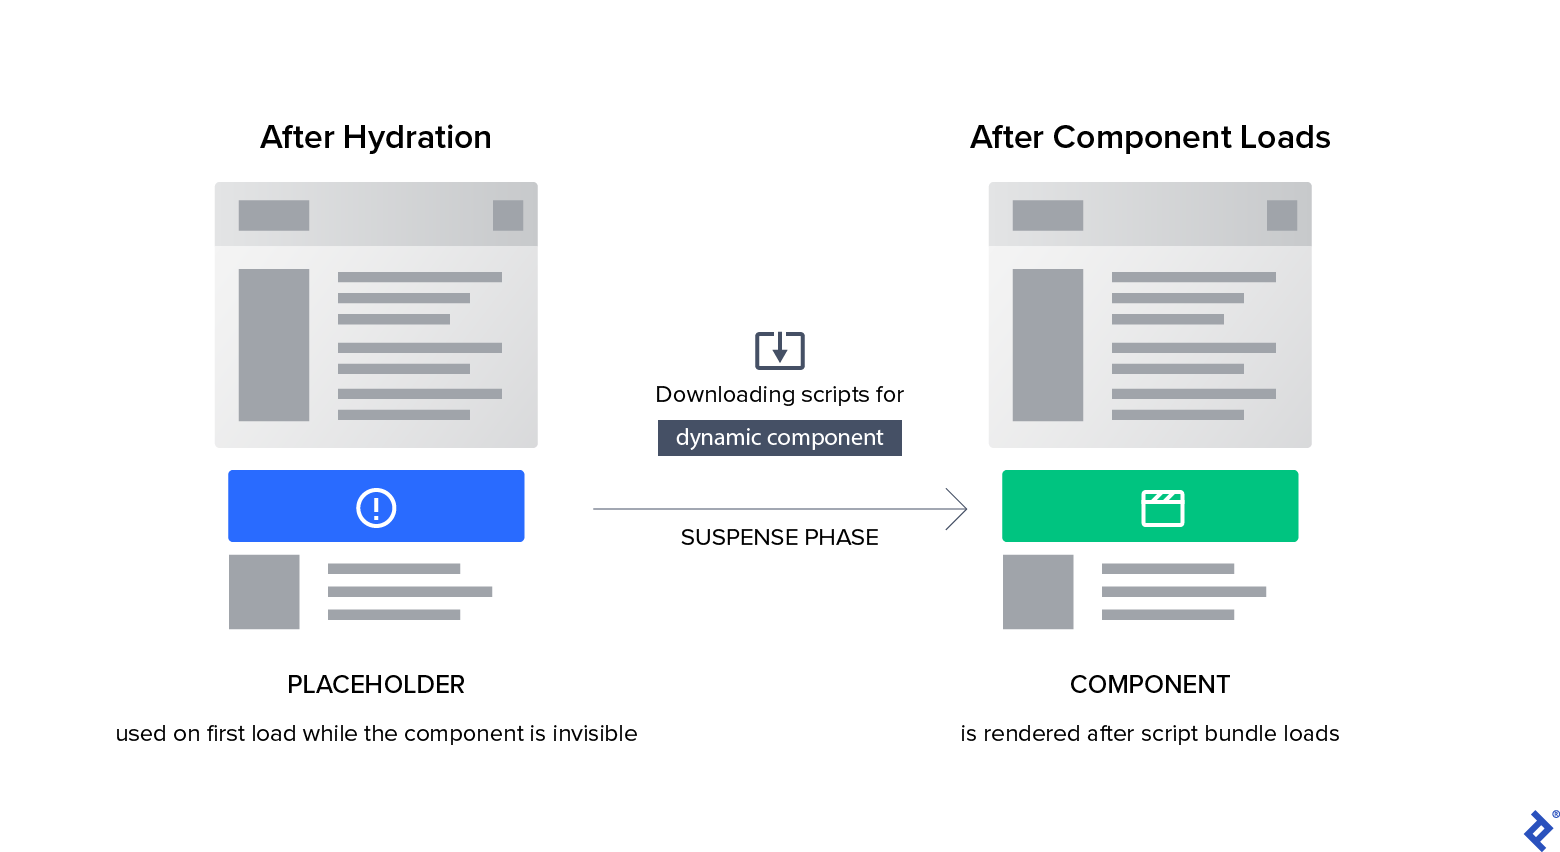 A page after hydration on the left, followed by the suspense phase and dynamic component download, culminating in a rendered component on the right.